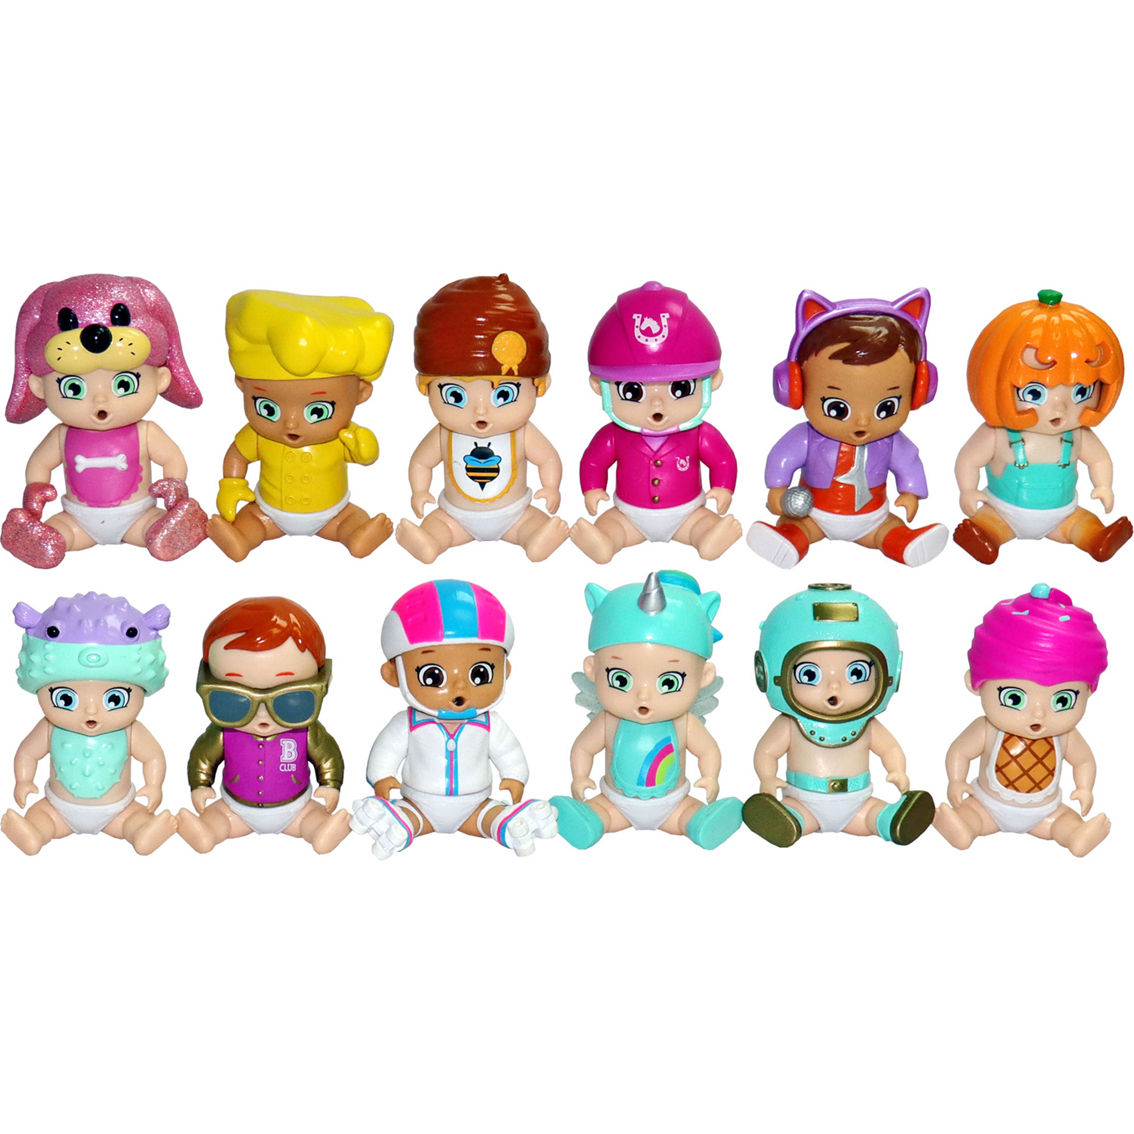 License 2 Play Baby Secrets Bathtime Surprise Toy - Image 2 of 4